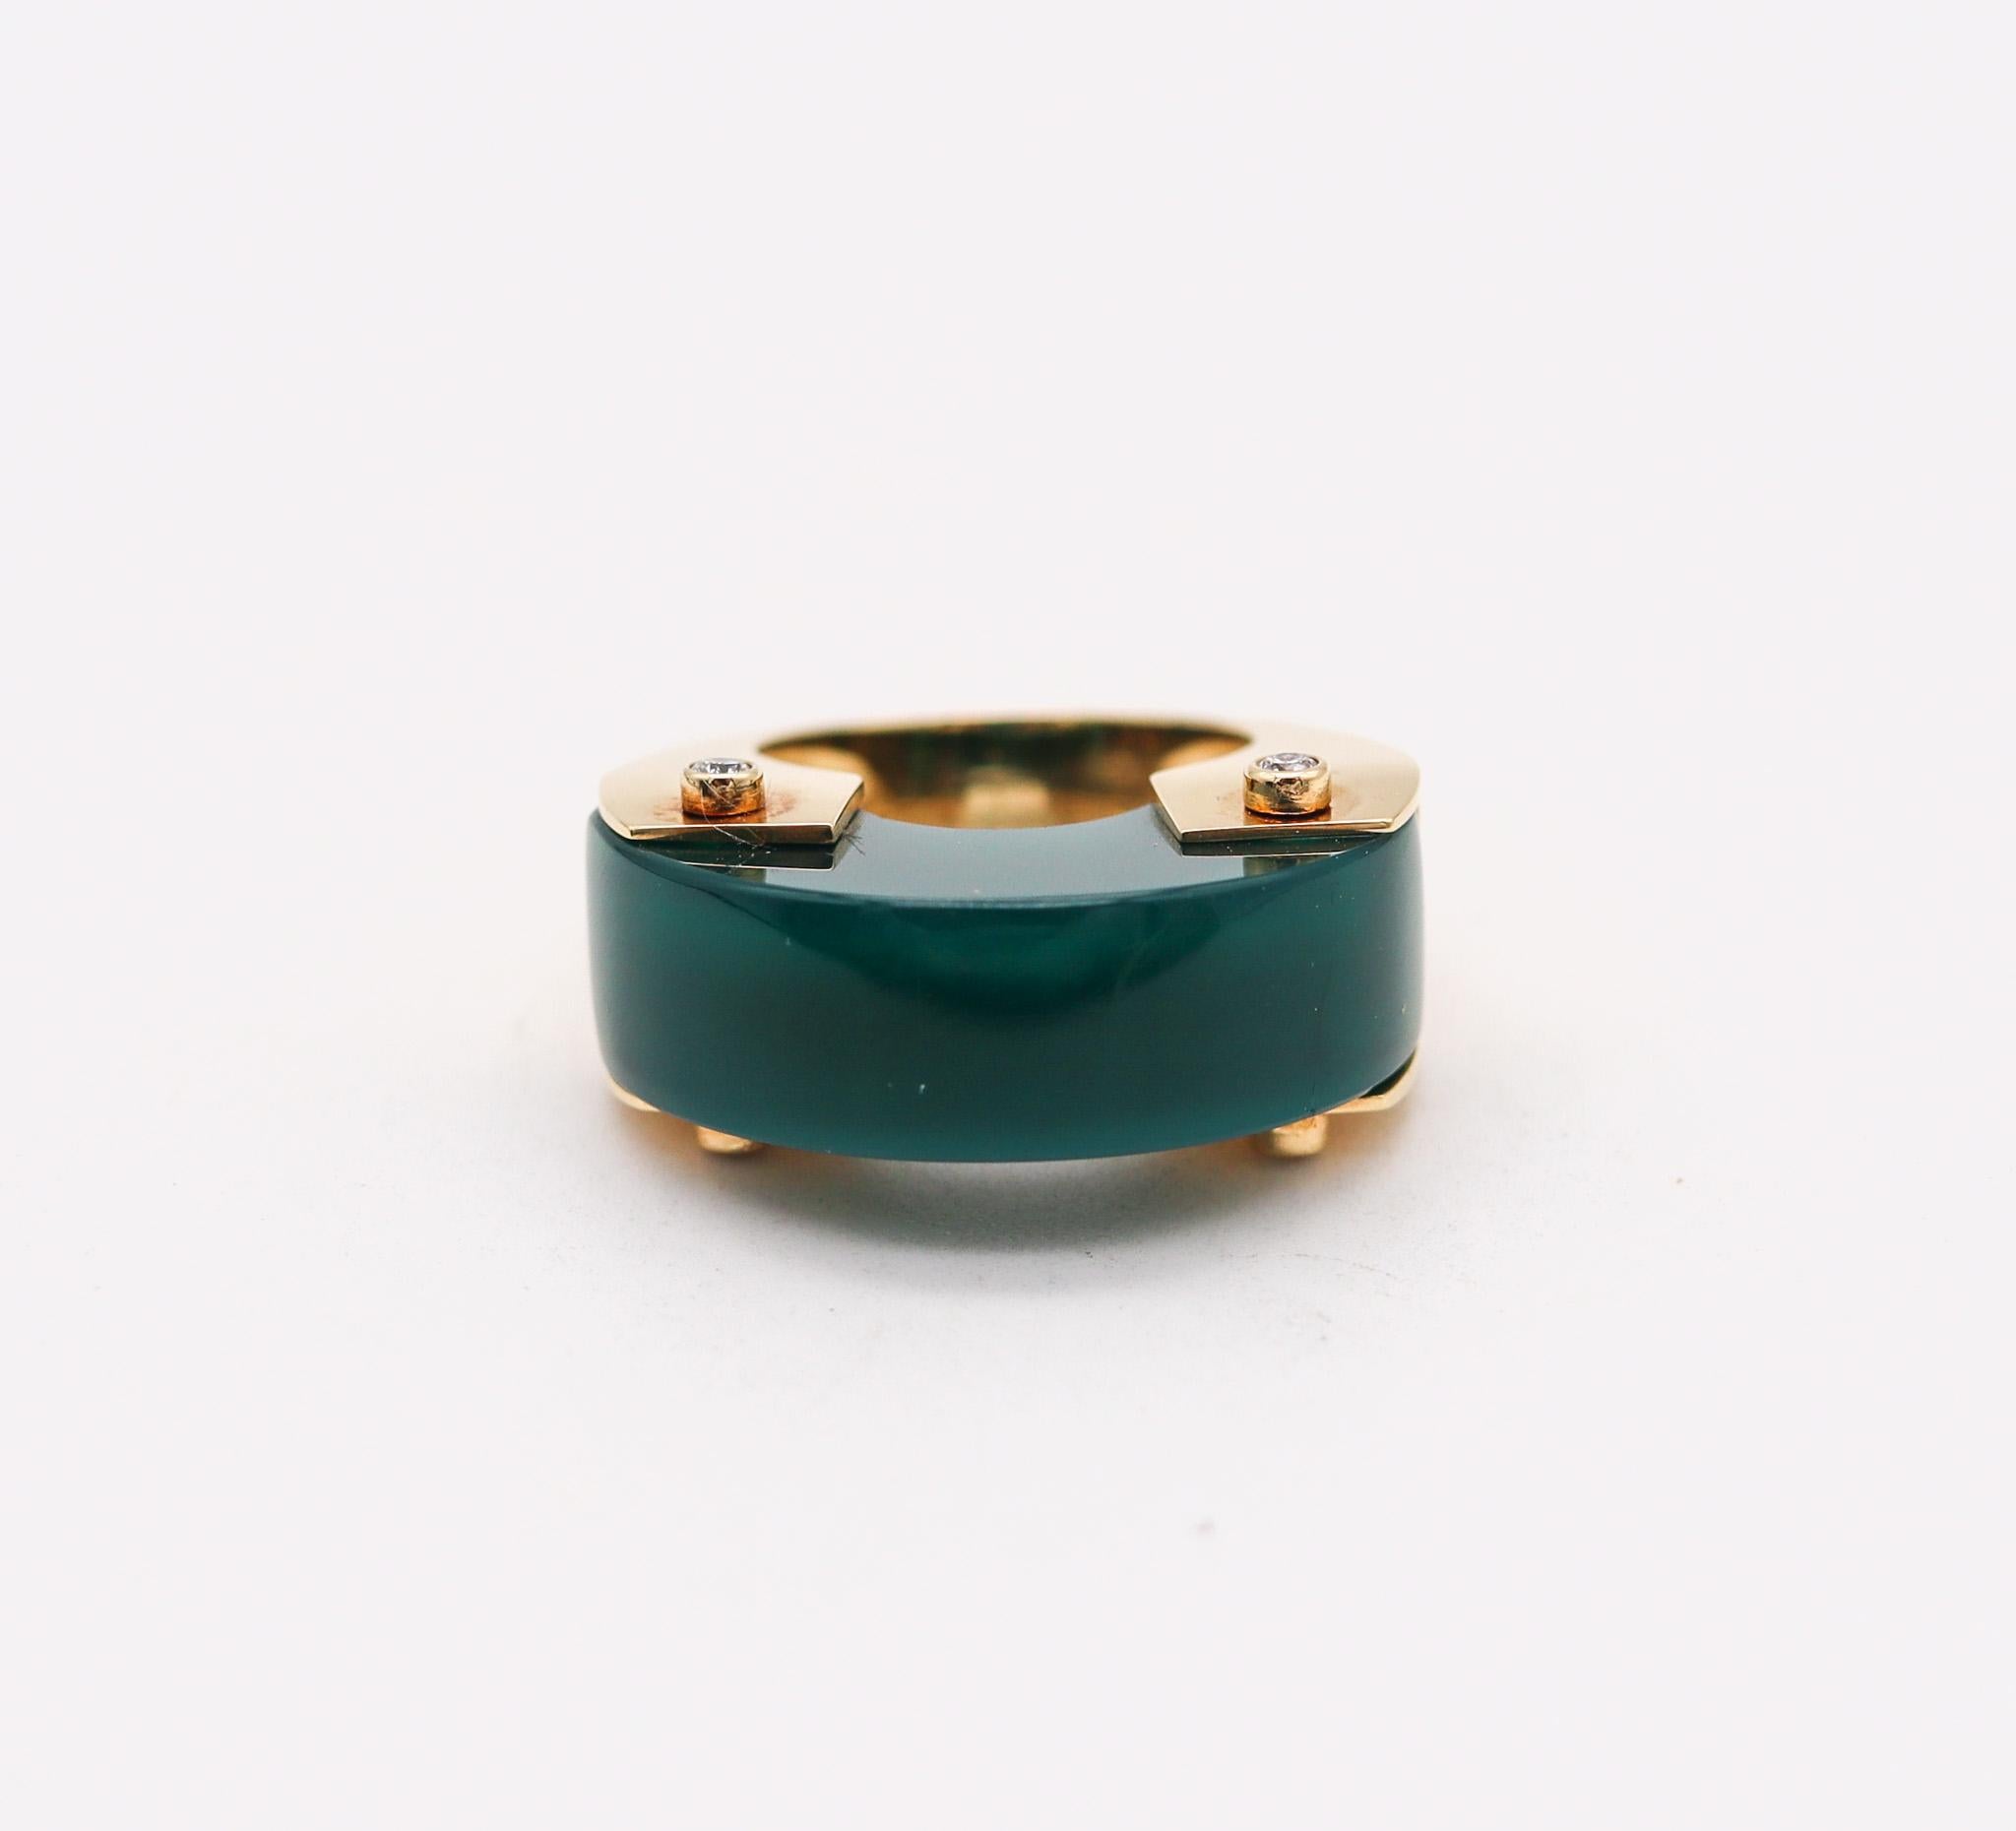 Geometric ring designed by the Aletto Brothers.

A contemporary geometric cocktail ring, created by the Italo-American jewelry designers Aletto Brothers. This cocktail ring has been masterfully crafted in an industrial shape in solid yellow gold of